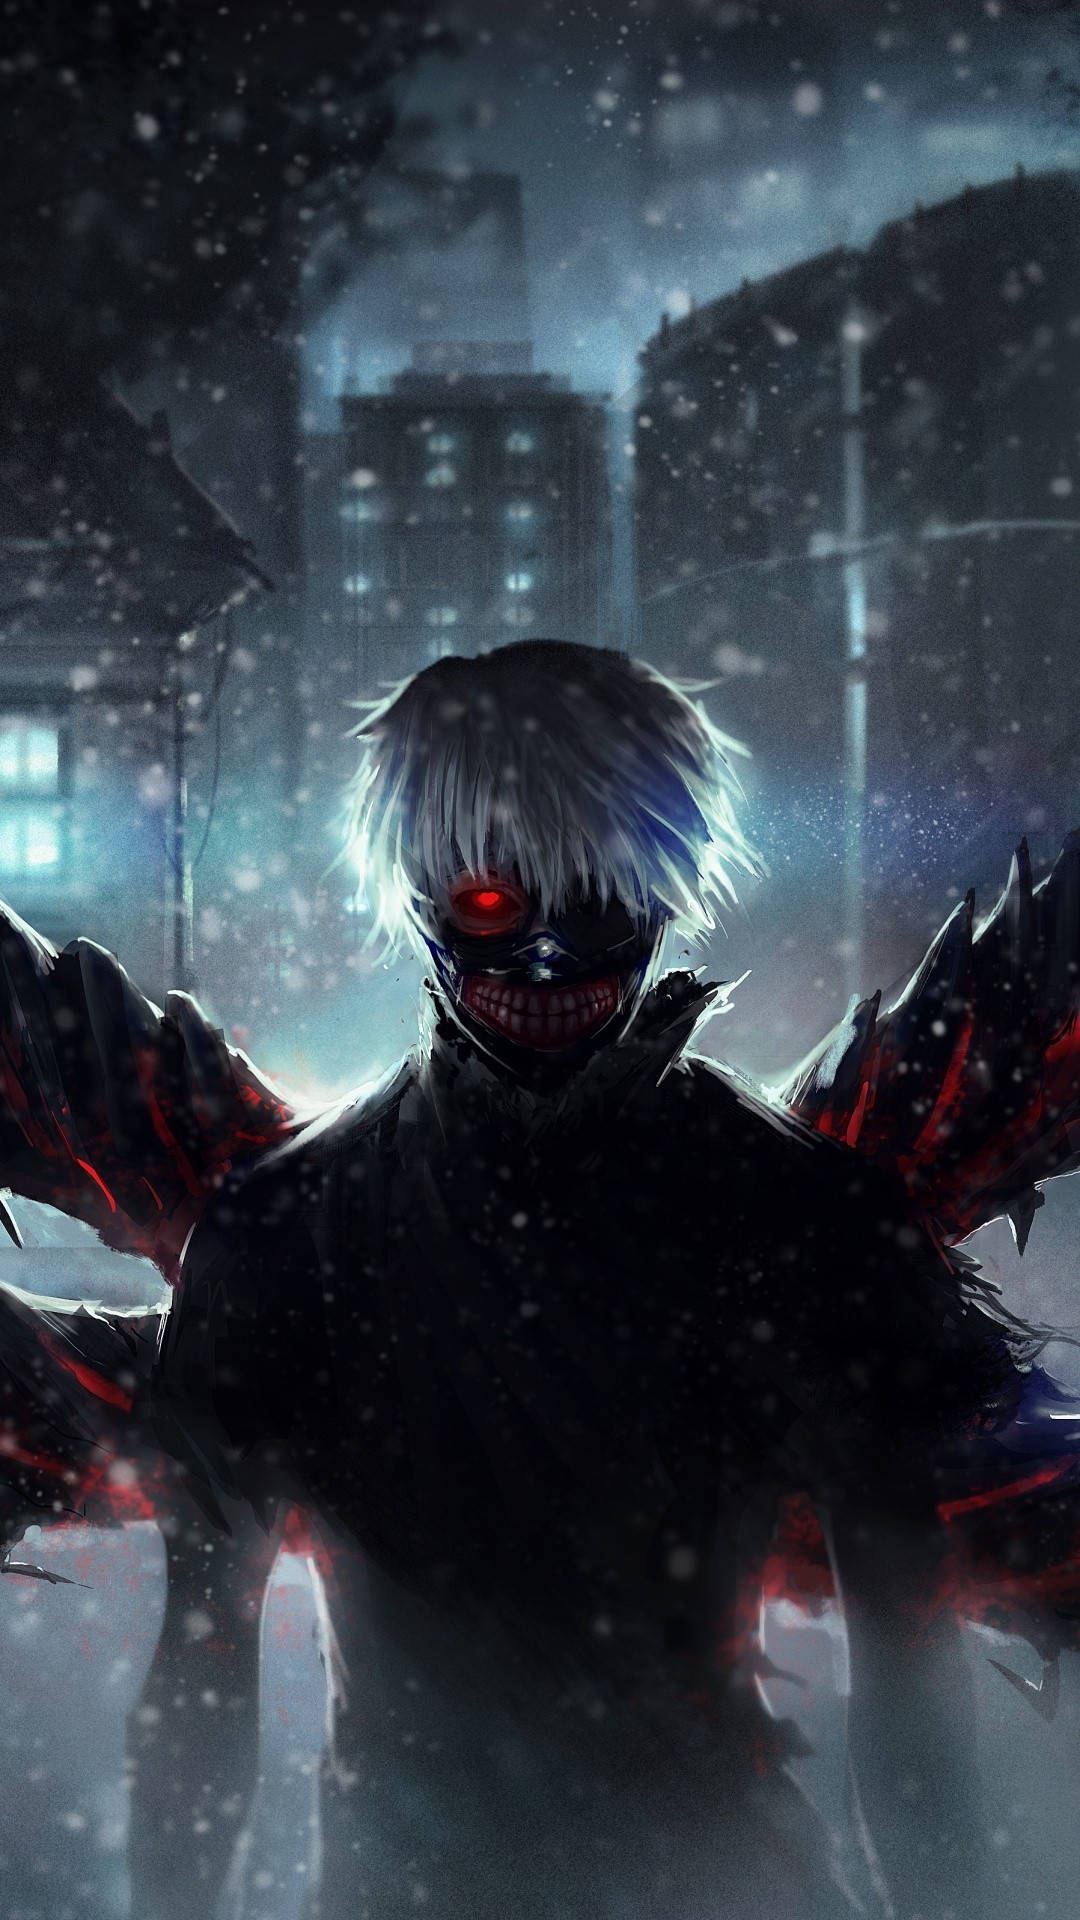 Red Wings Ken Tokyo Ghoul Iphone Background Background